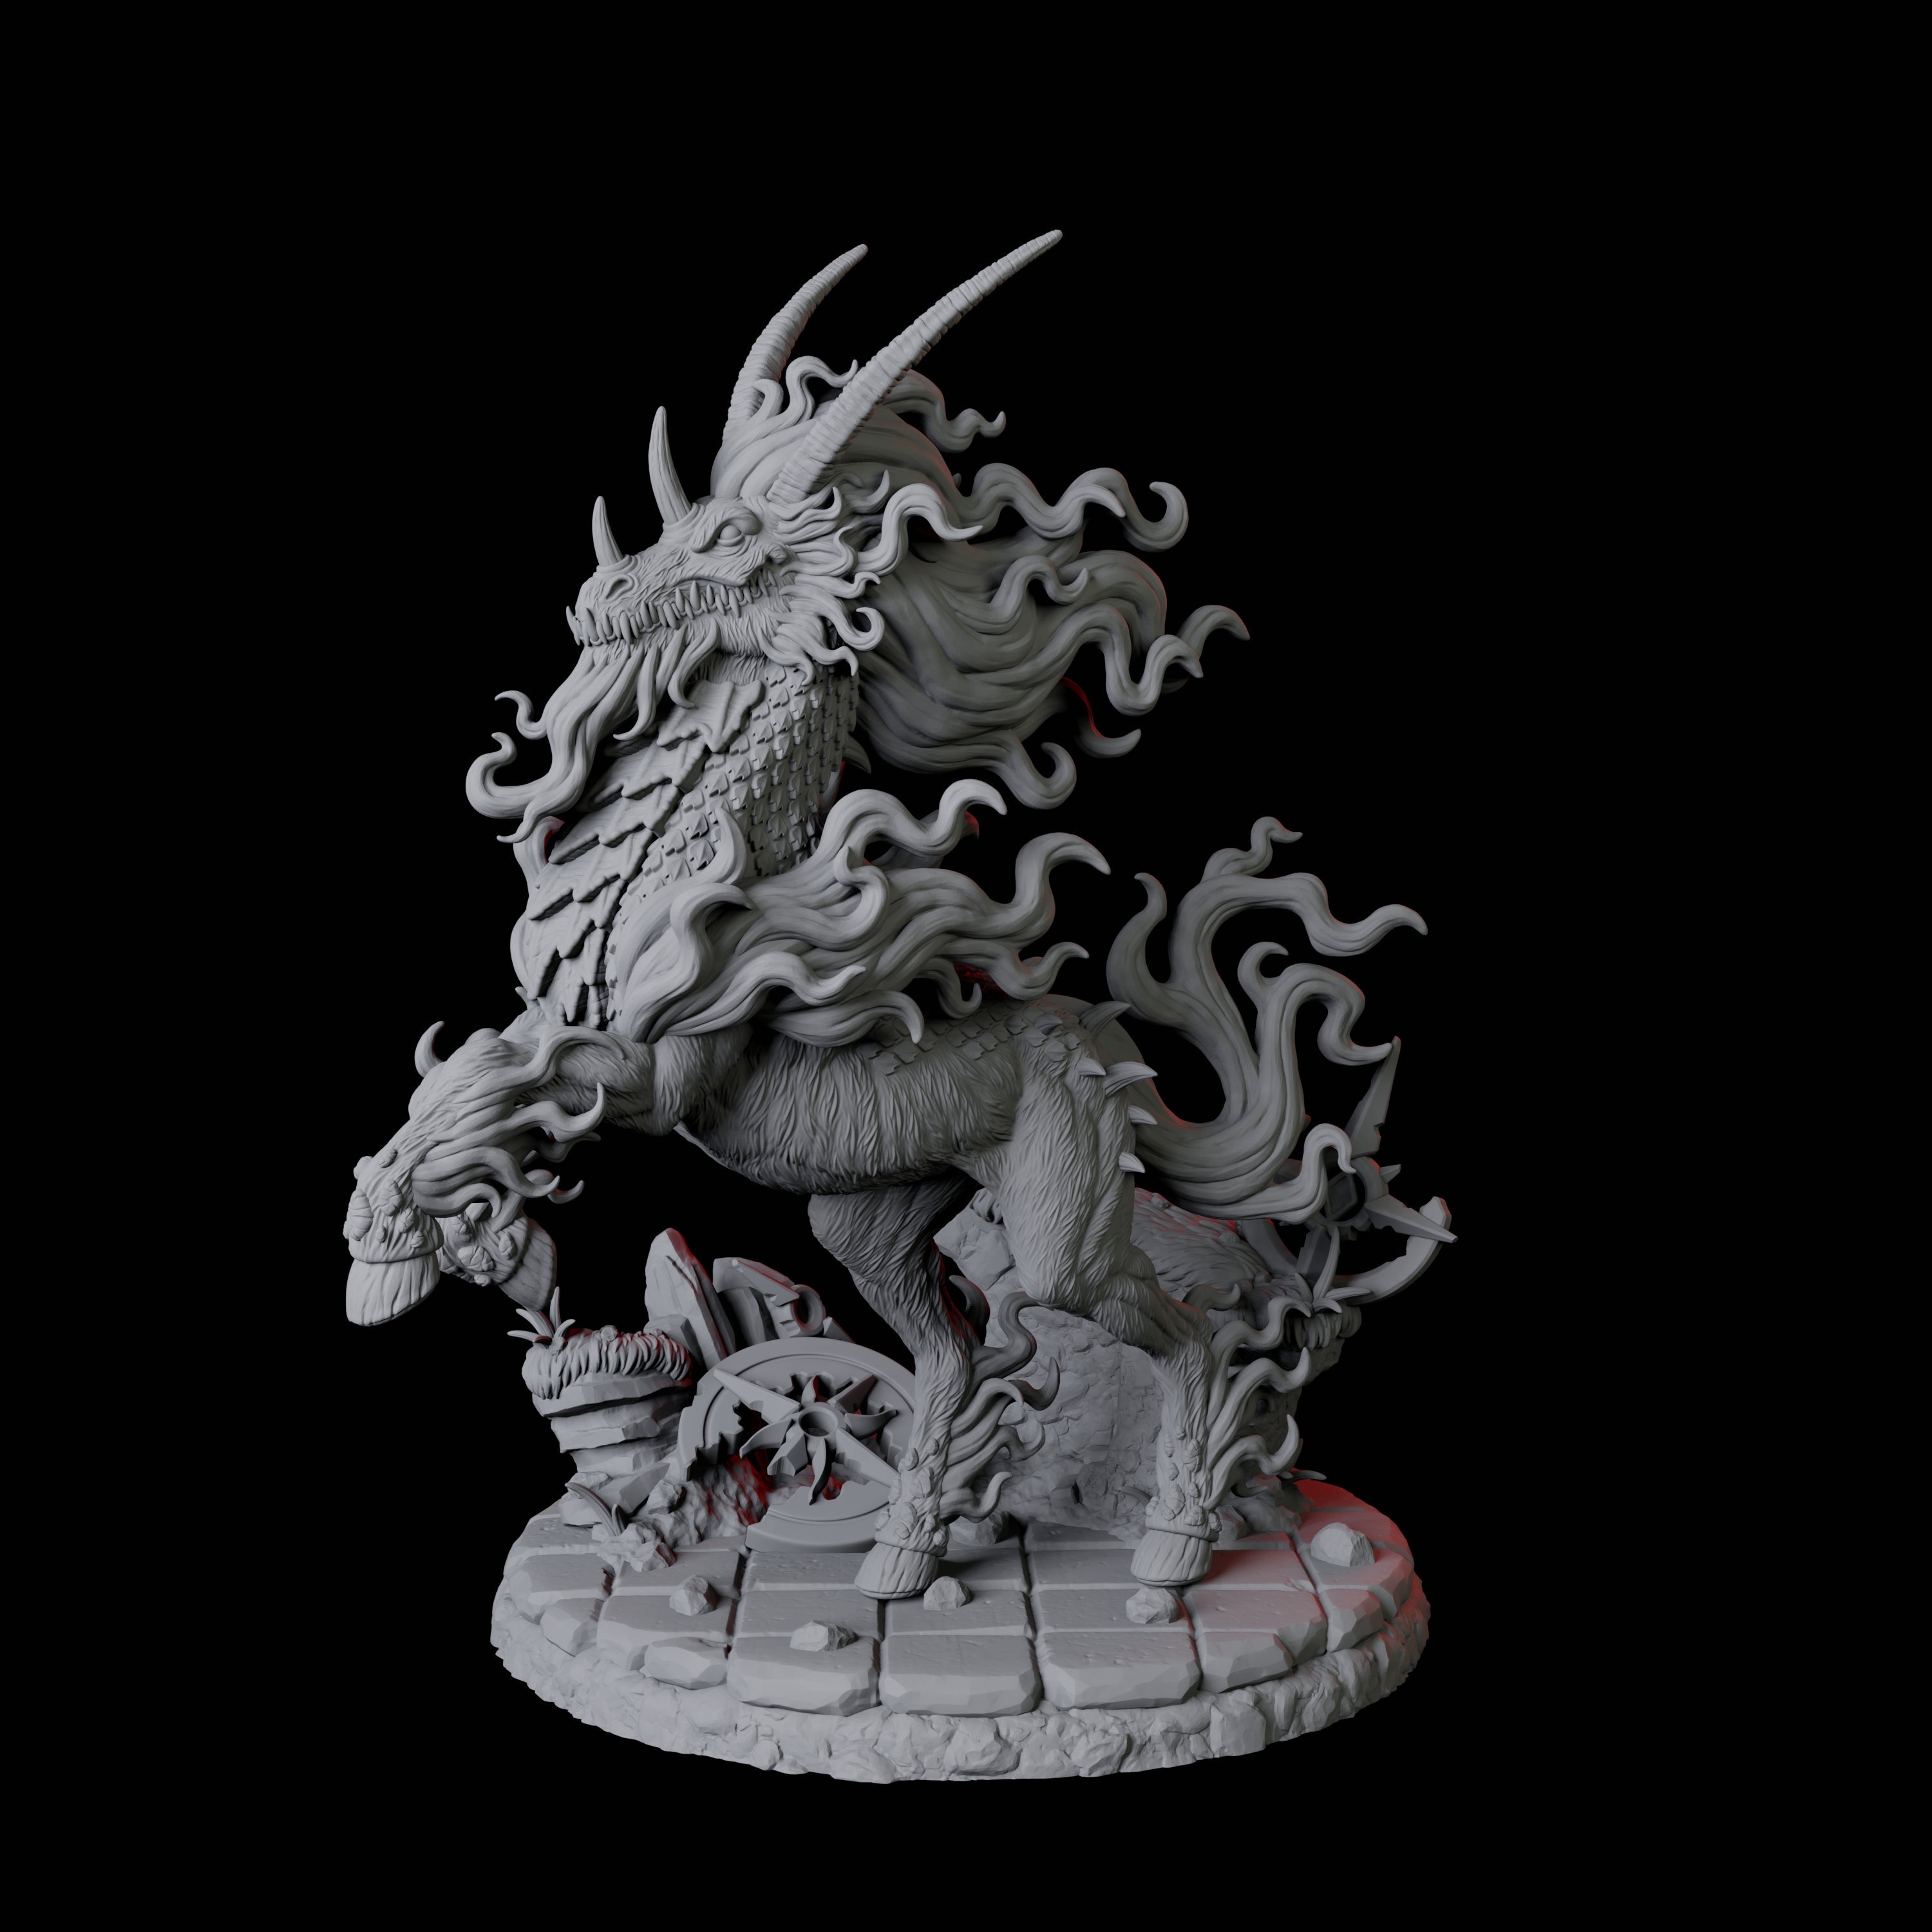 Blazing Nightmare Miniature for Dungeons and Dragons, Pathfinder or other TTRPGs